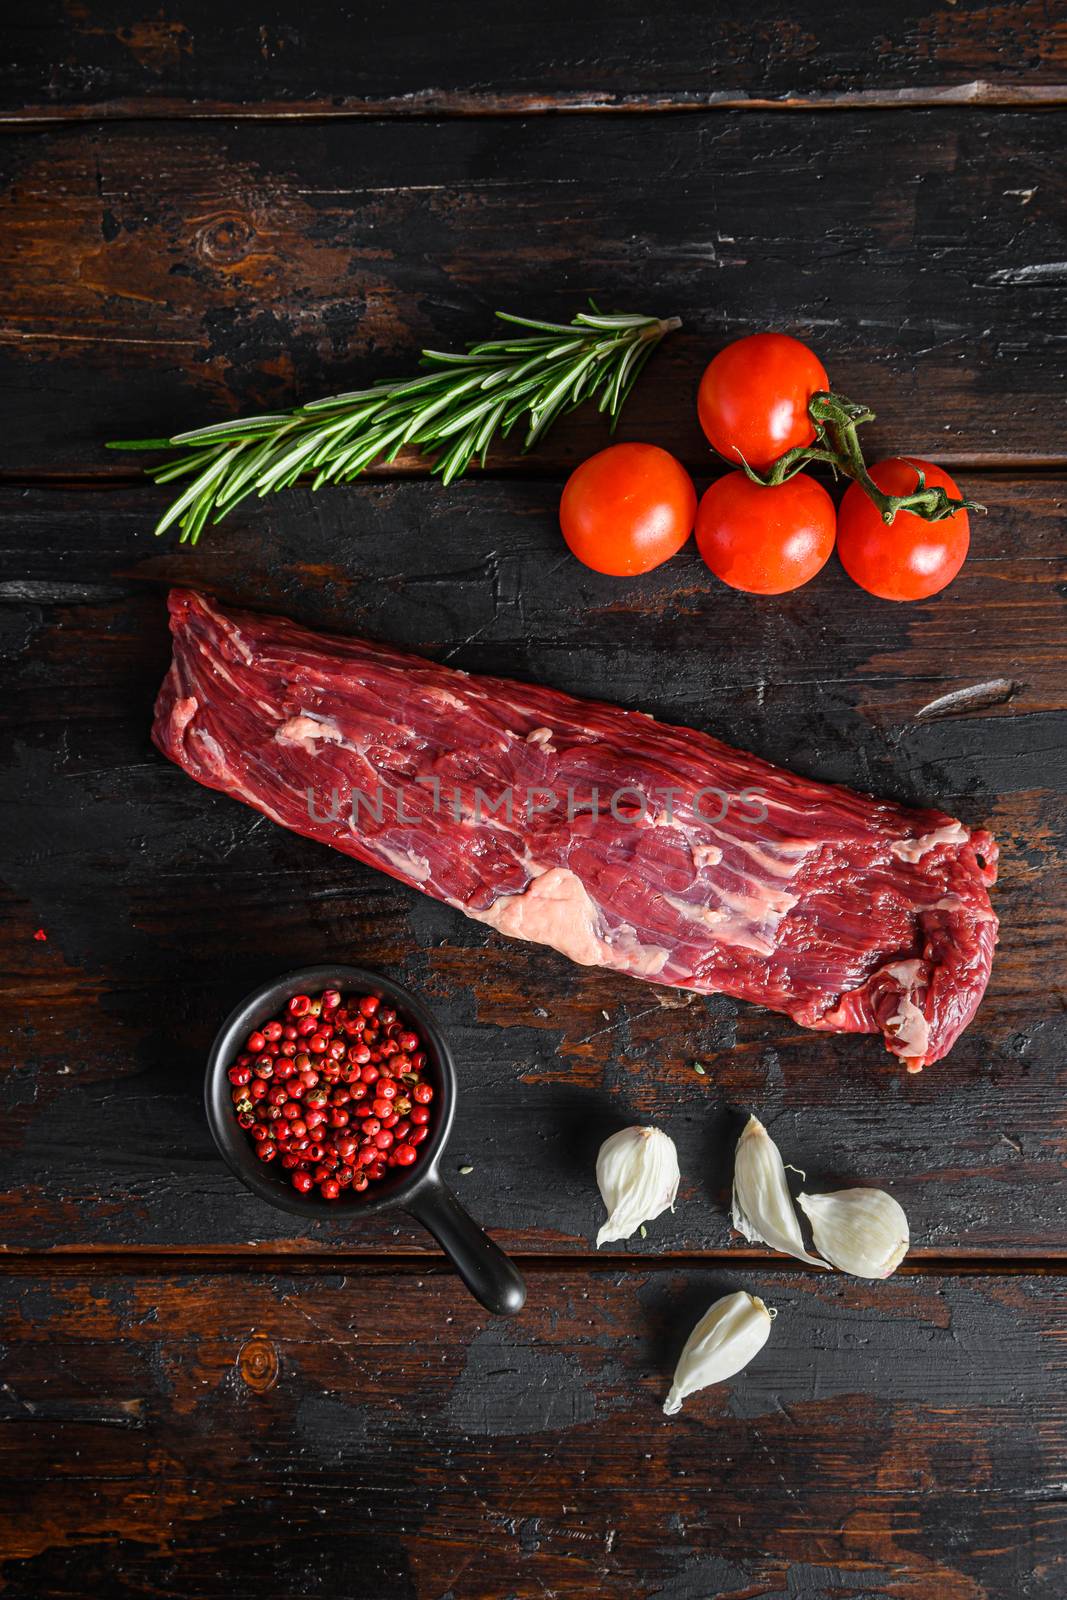 Organic Skirt Steak or Onglet cut, with rosemary over wood background Top view by Ilianesolenyi